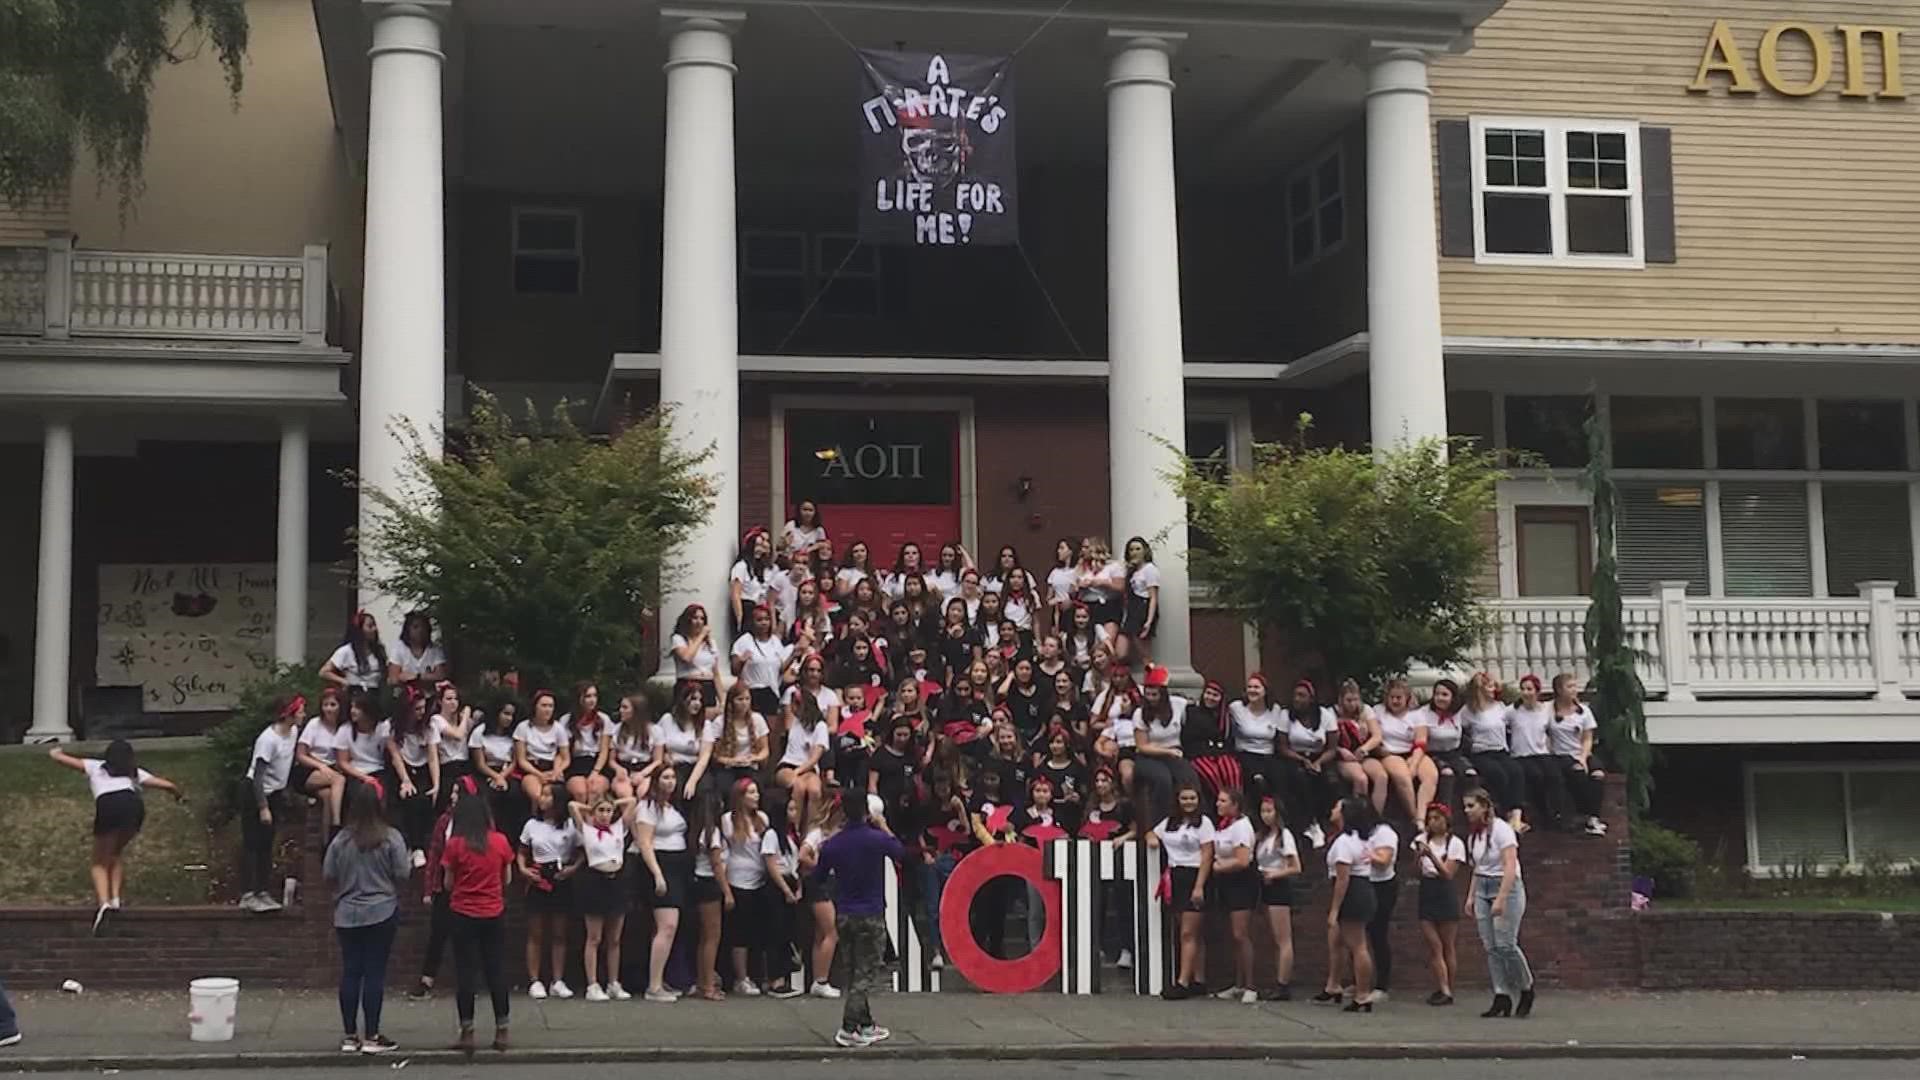 Alpha Omicron Pi, a national sorority based out of Tennessee, charged the students thousands in 2020 and 2021, according to the Attorney General's Office.